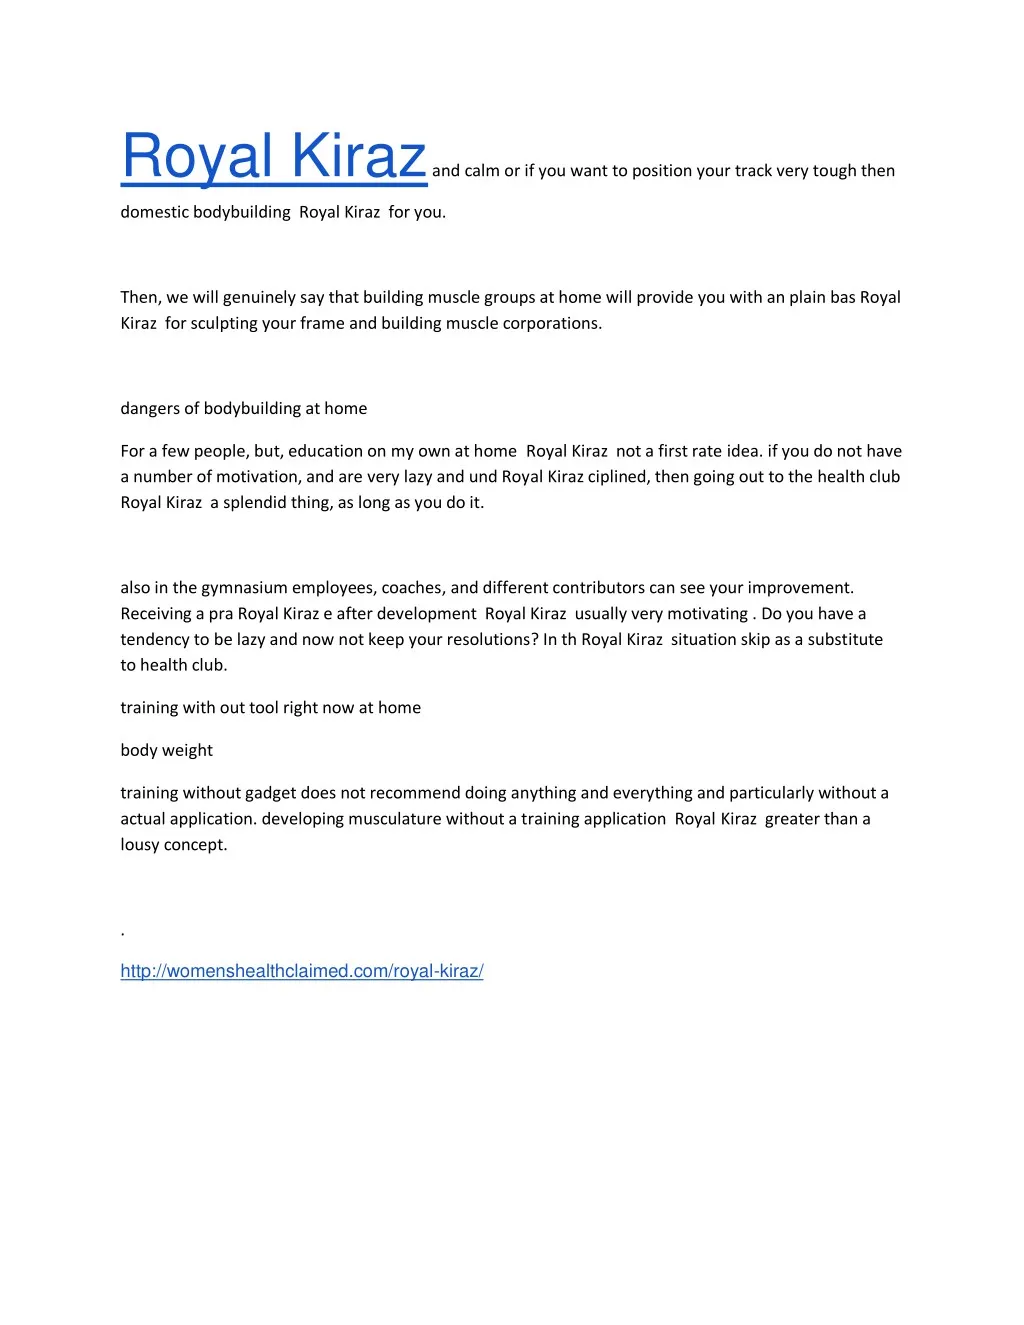 royal kiraz and calm or if you want to position